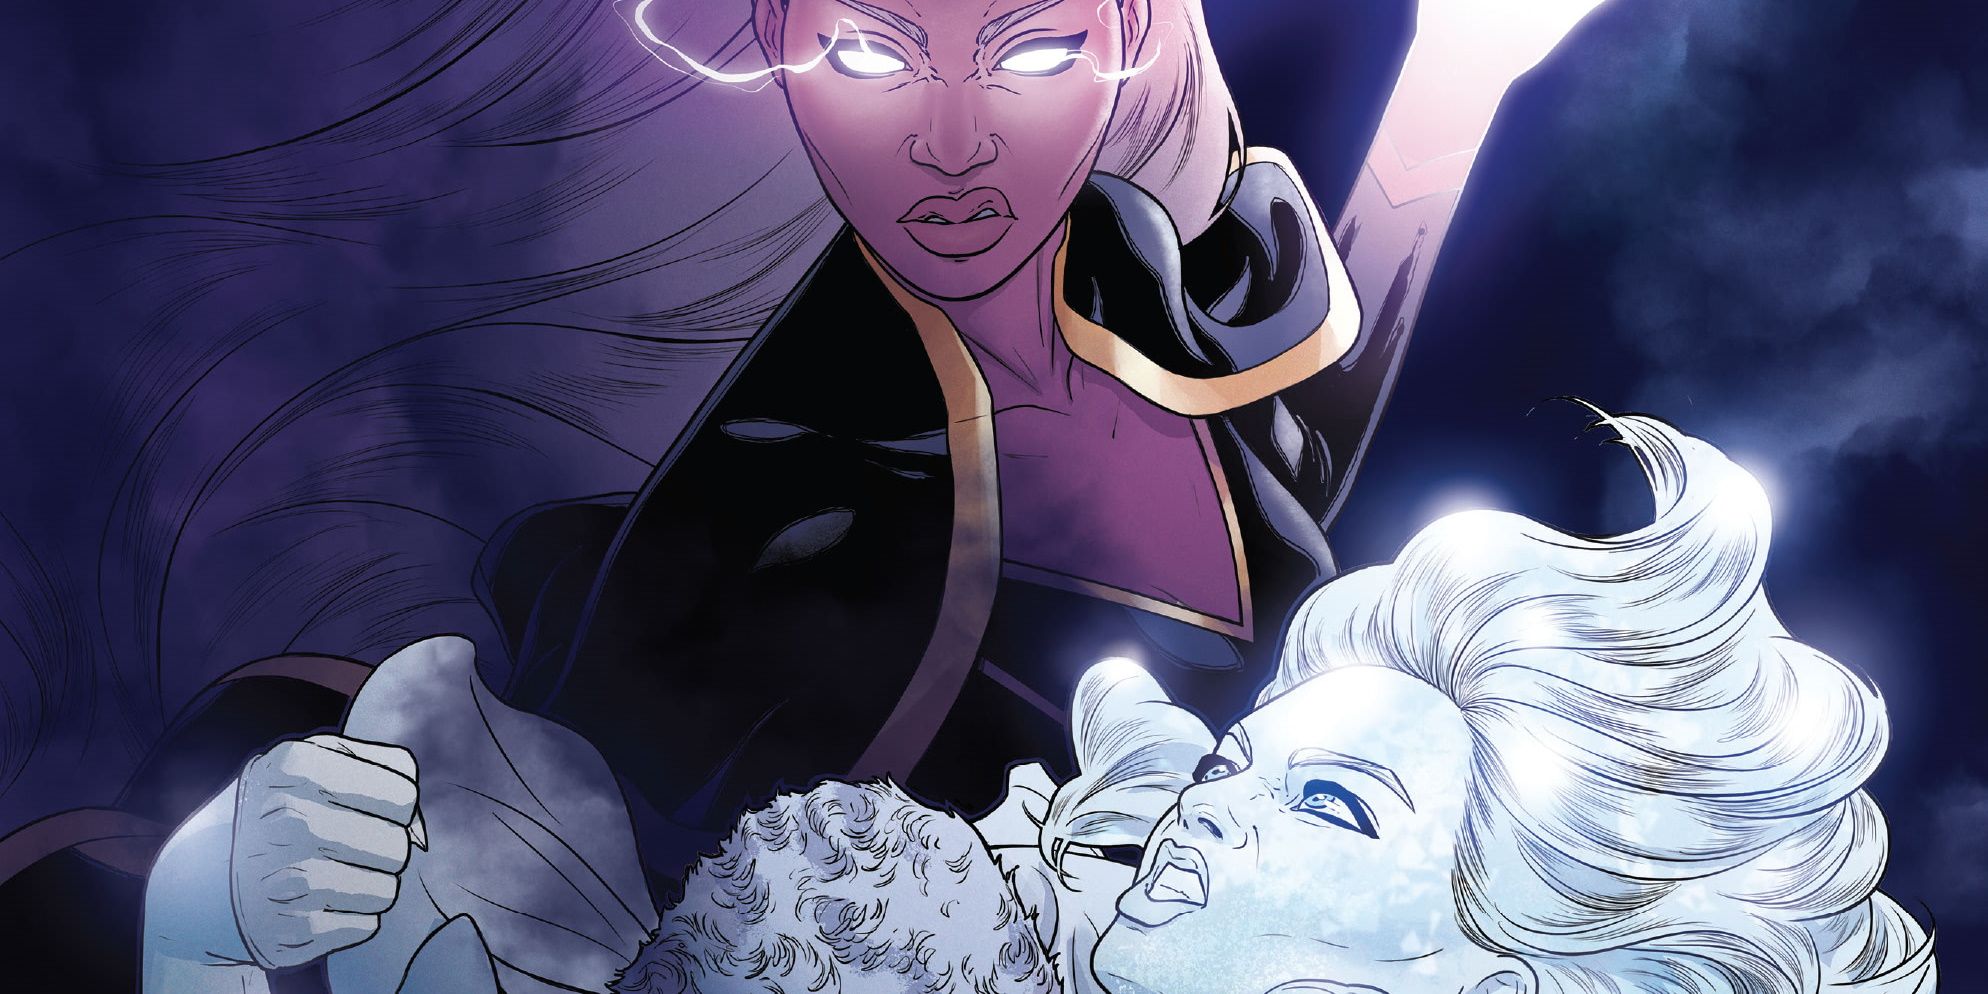 XMEN Emma Frost Gets Slapped By A Raging Storm